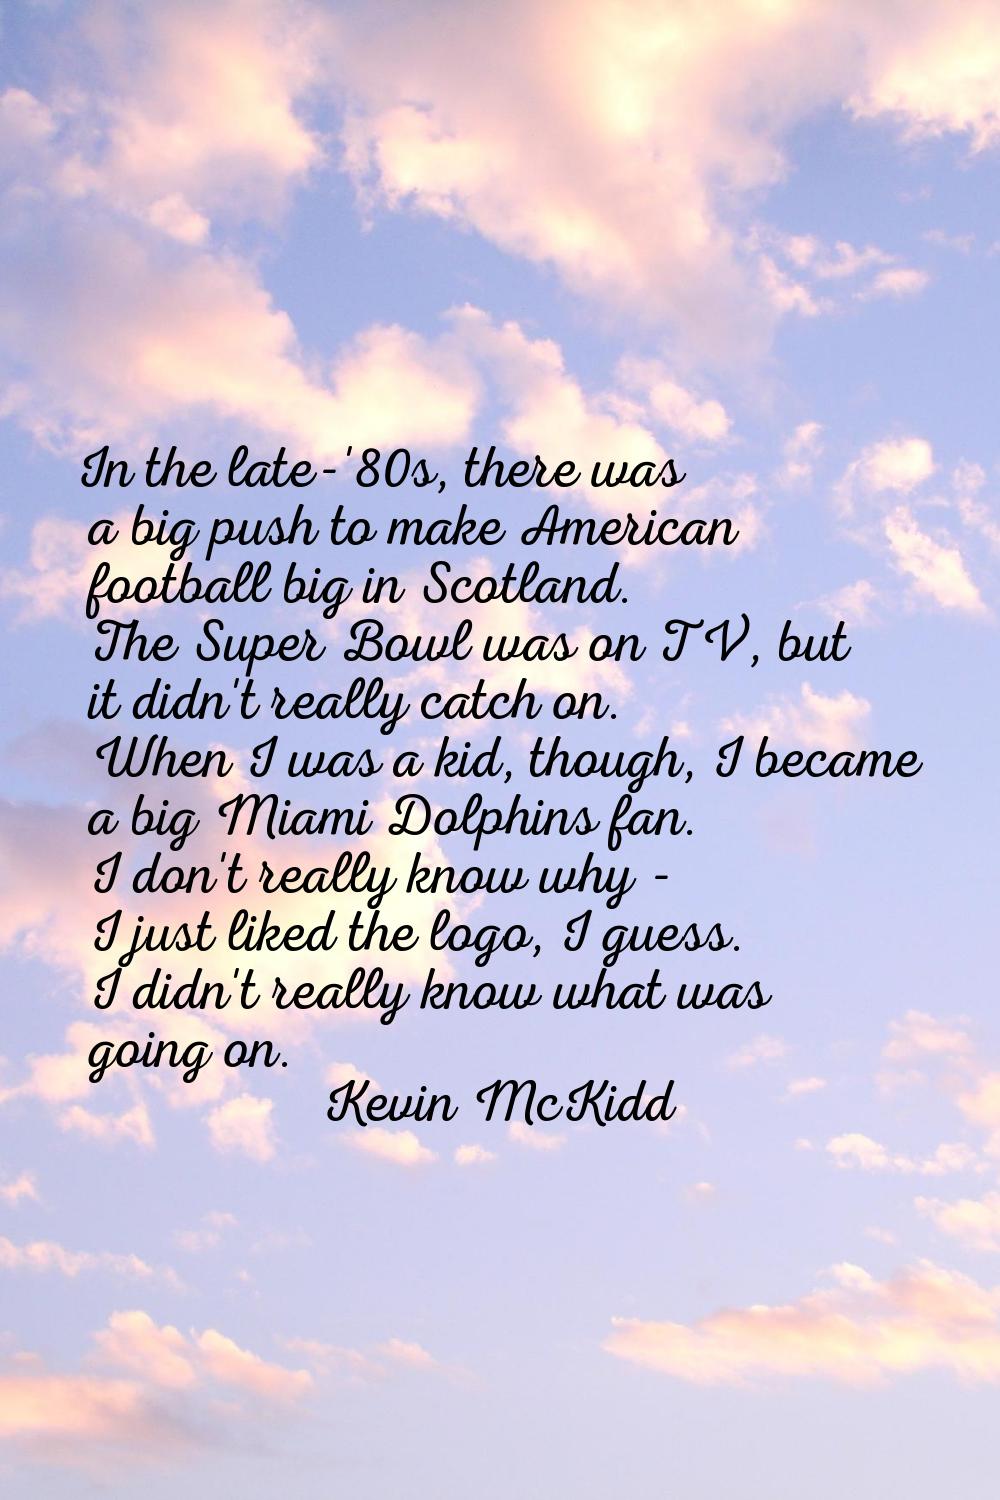 In the late-'80s, there was a big push to make American football big in Scotland. The Super Bowl wa